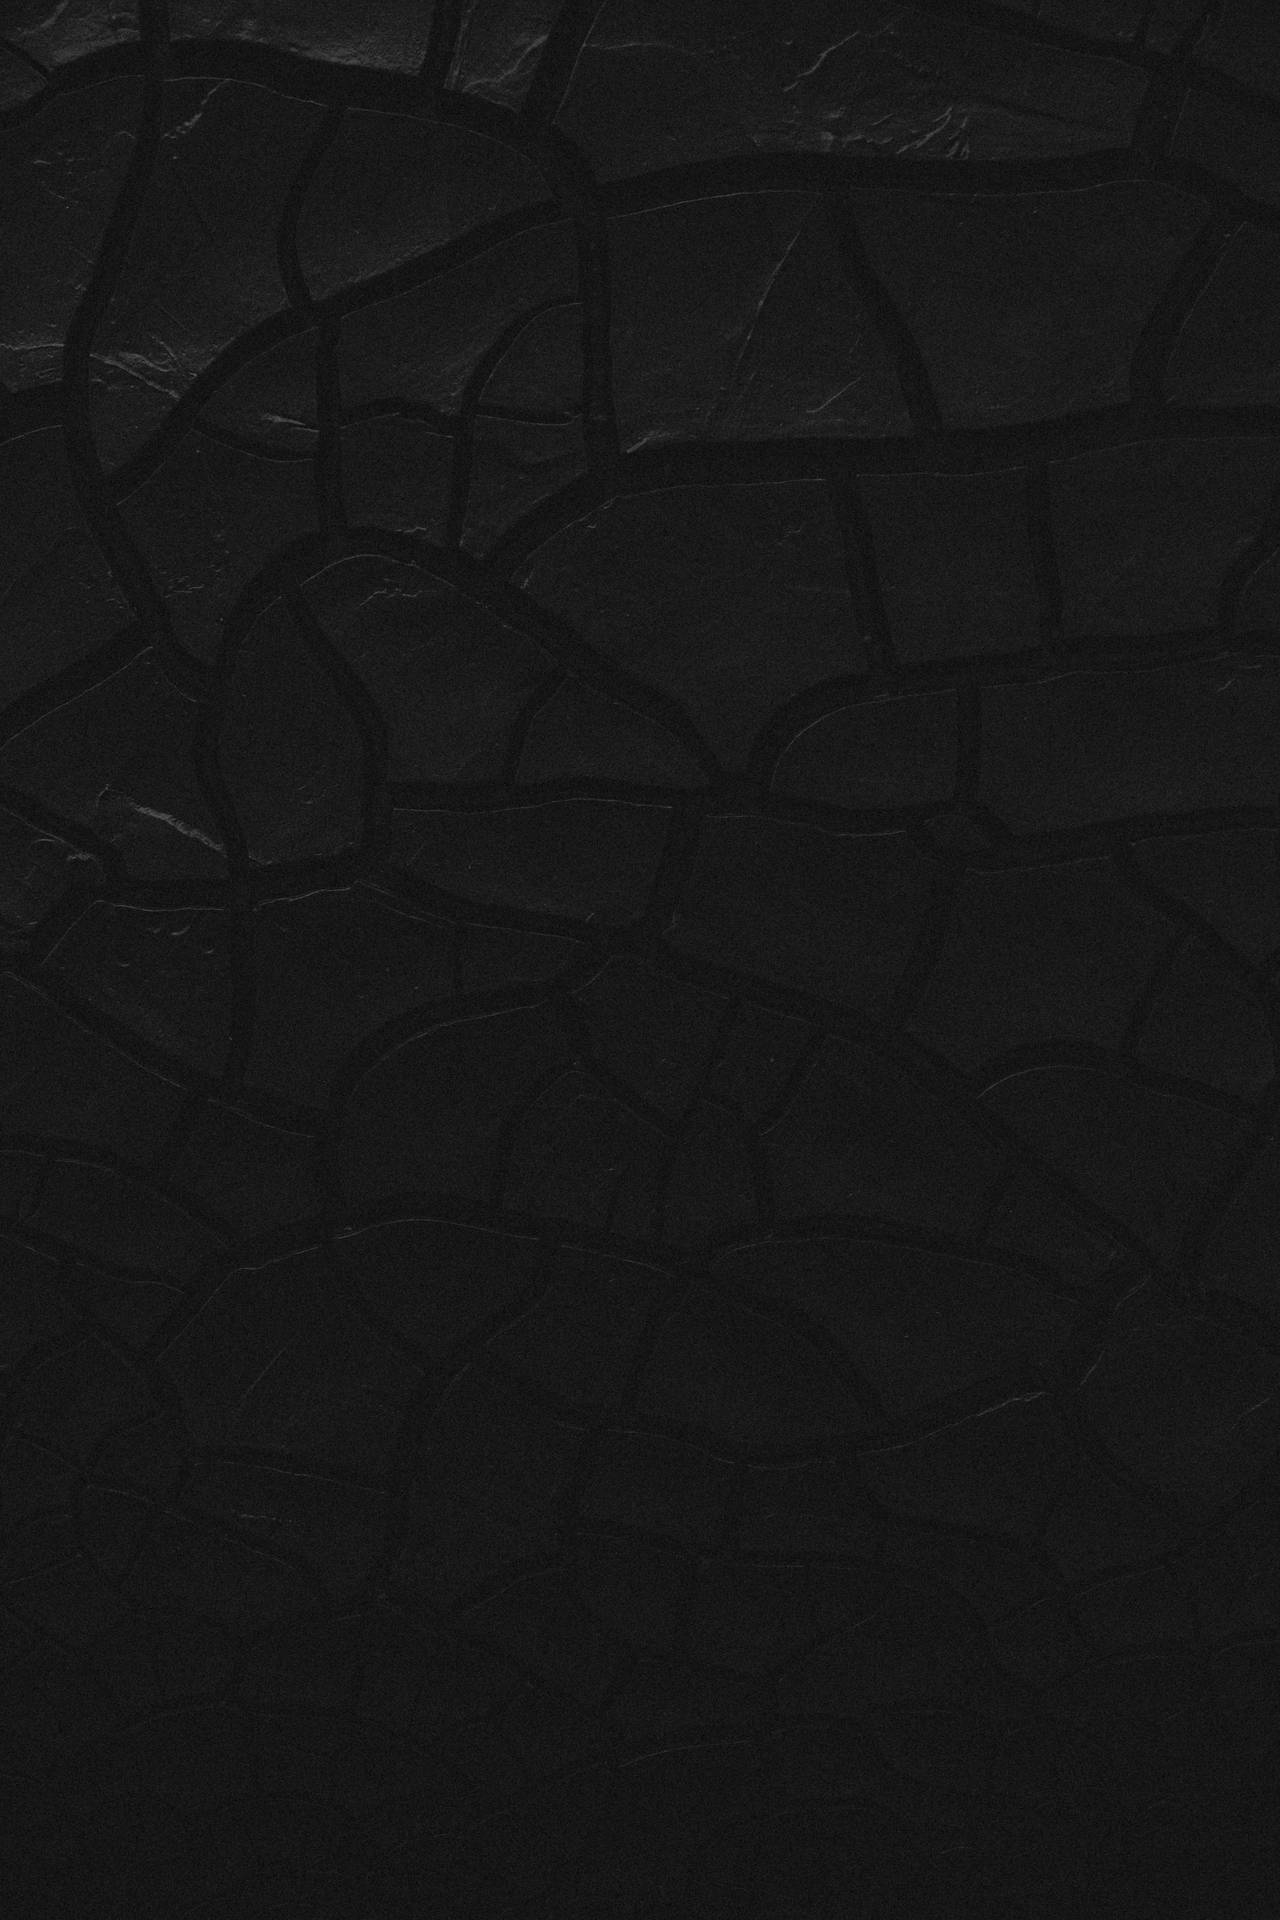 Plain Black With Cracked Surface Background